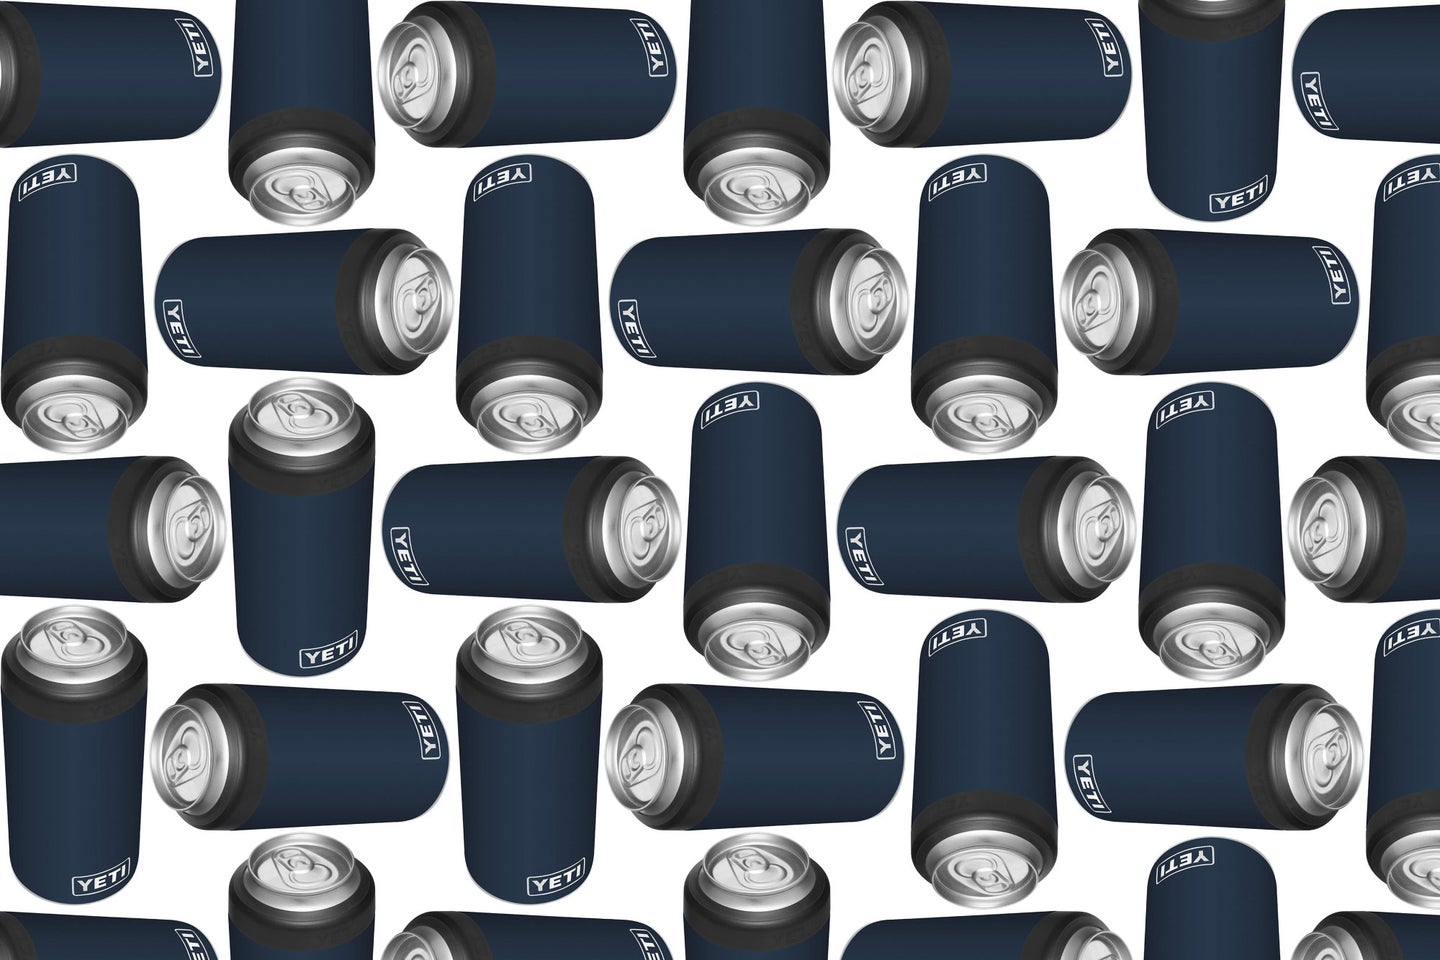 Yeti drinkware in a pattern on a plain background